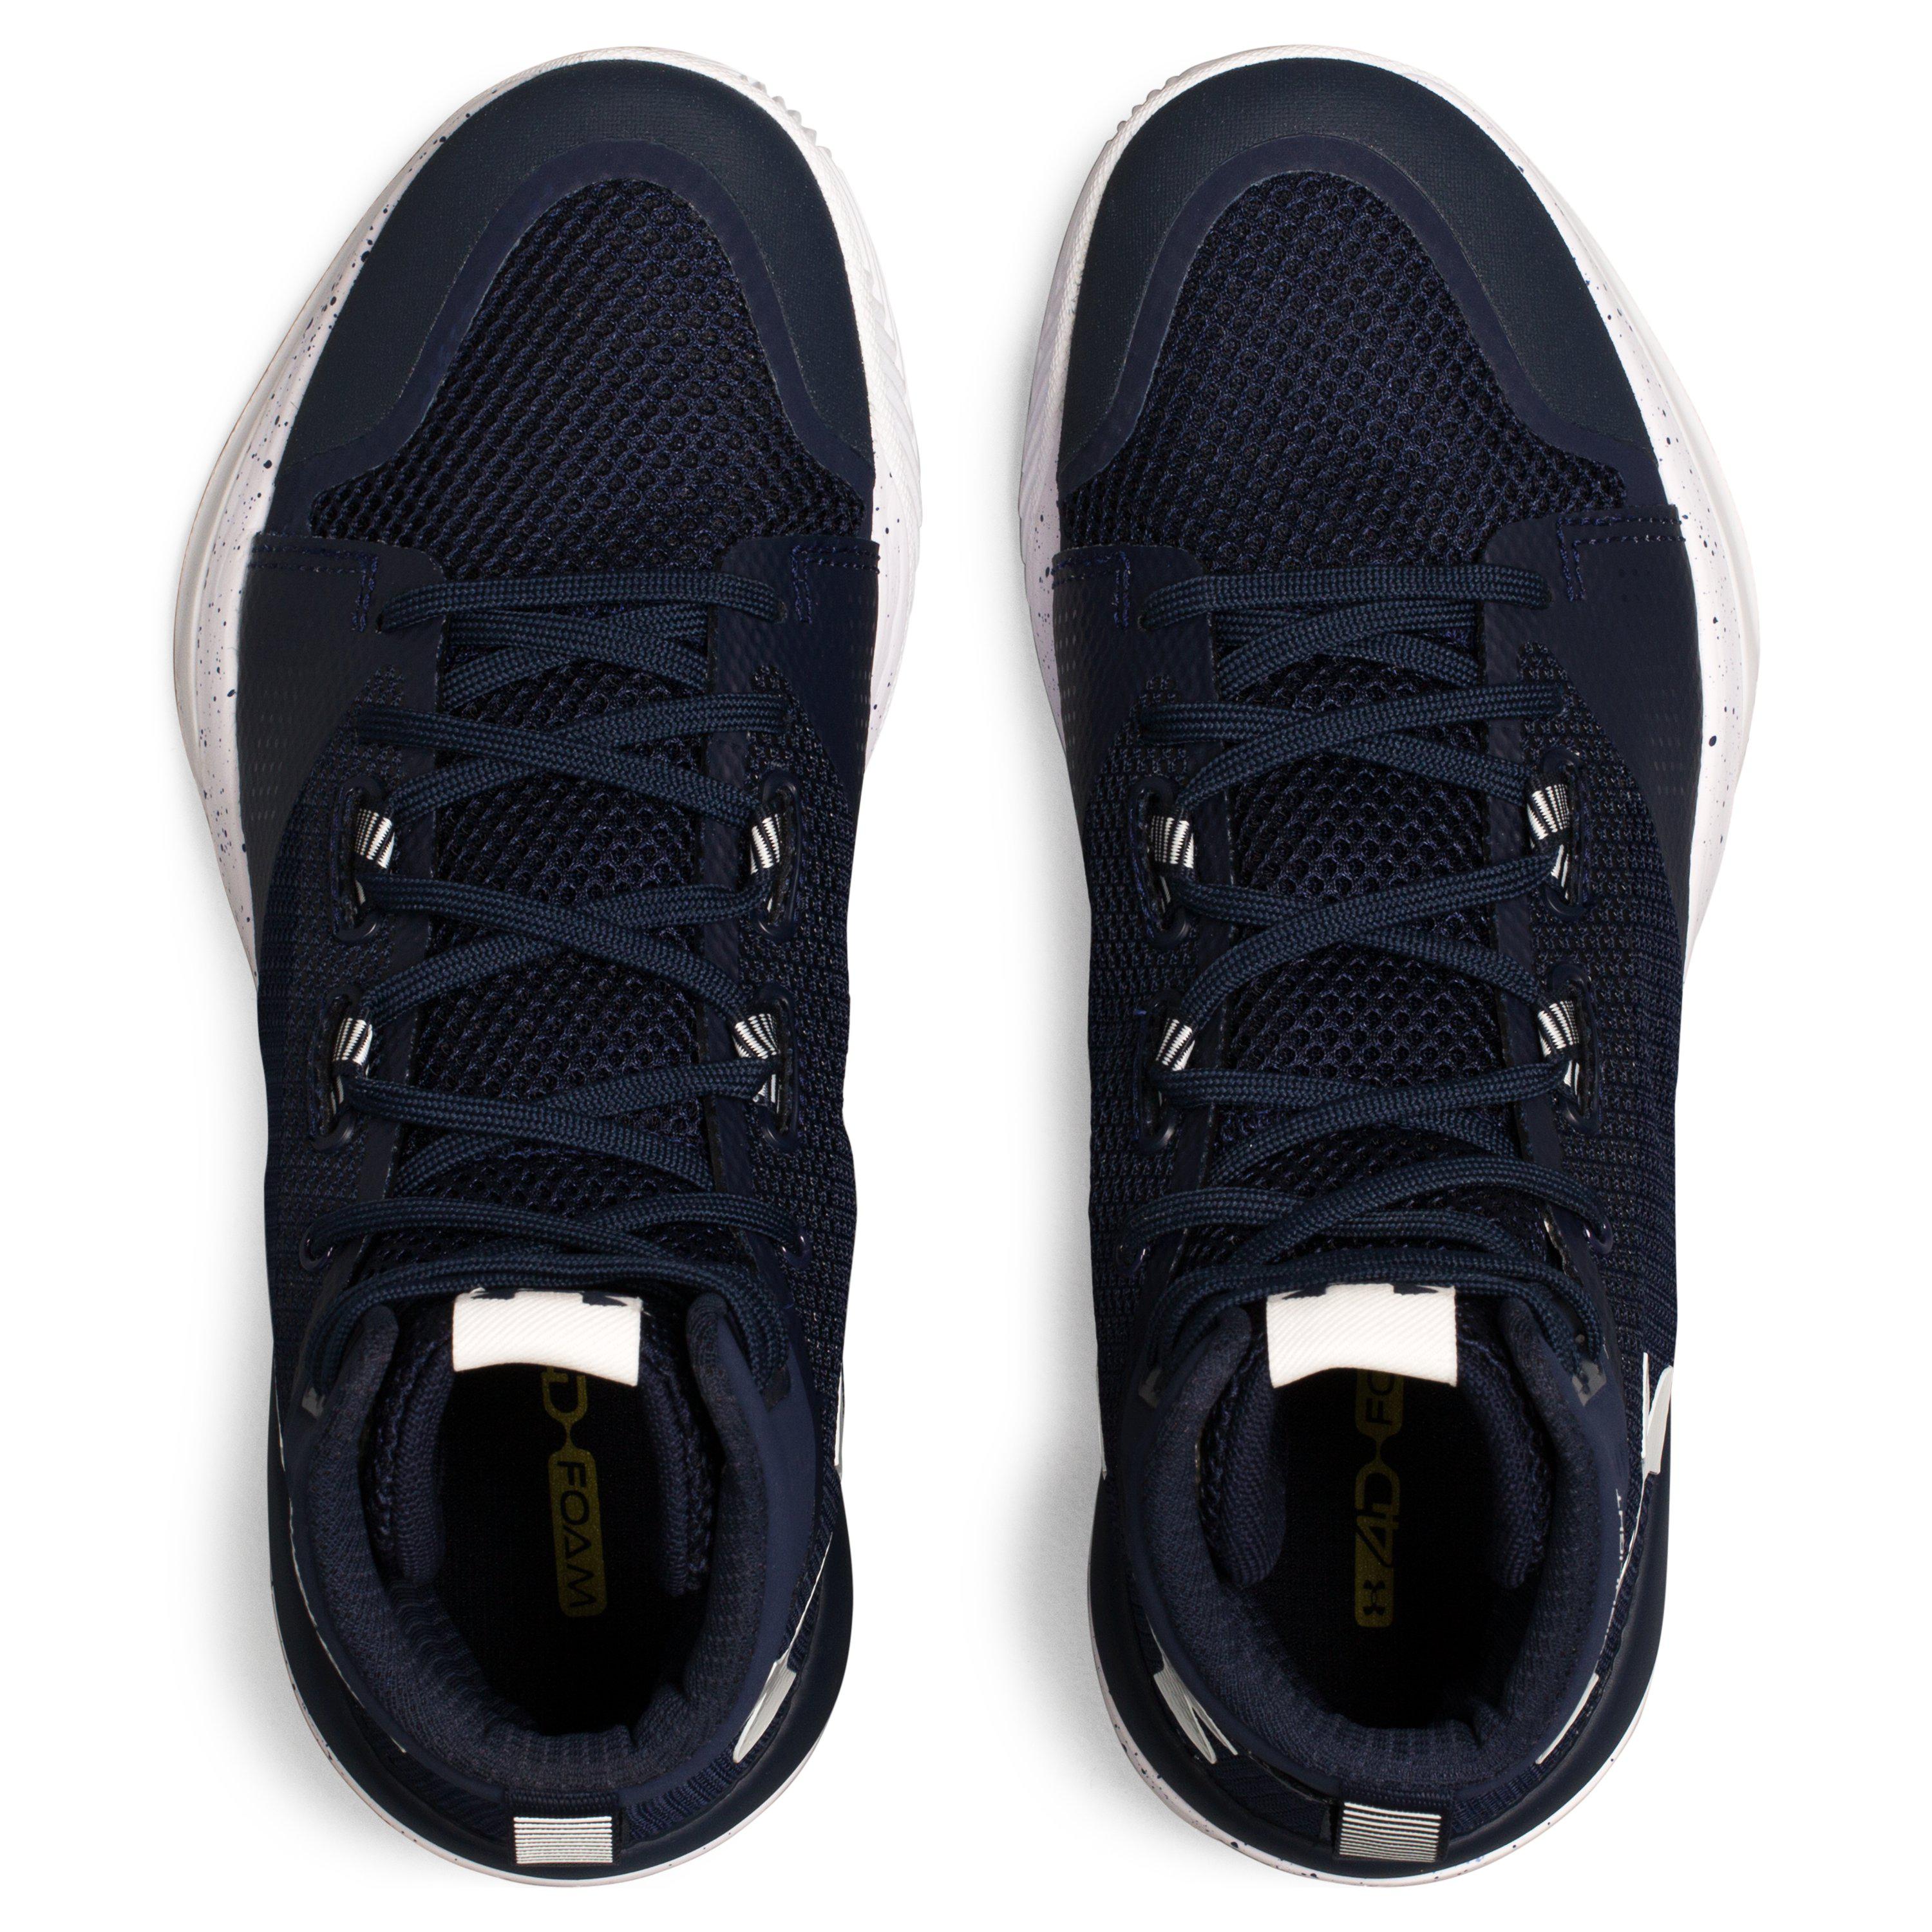 Under Armour Women's Ua Highlight Ace Volleyball Shoes in Midnight Navy ...